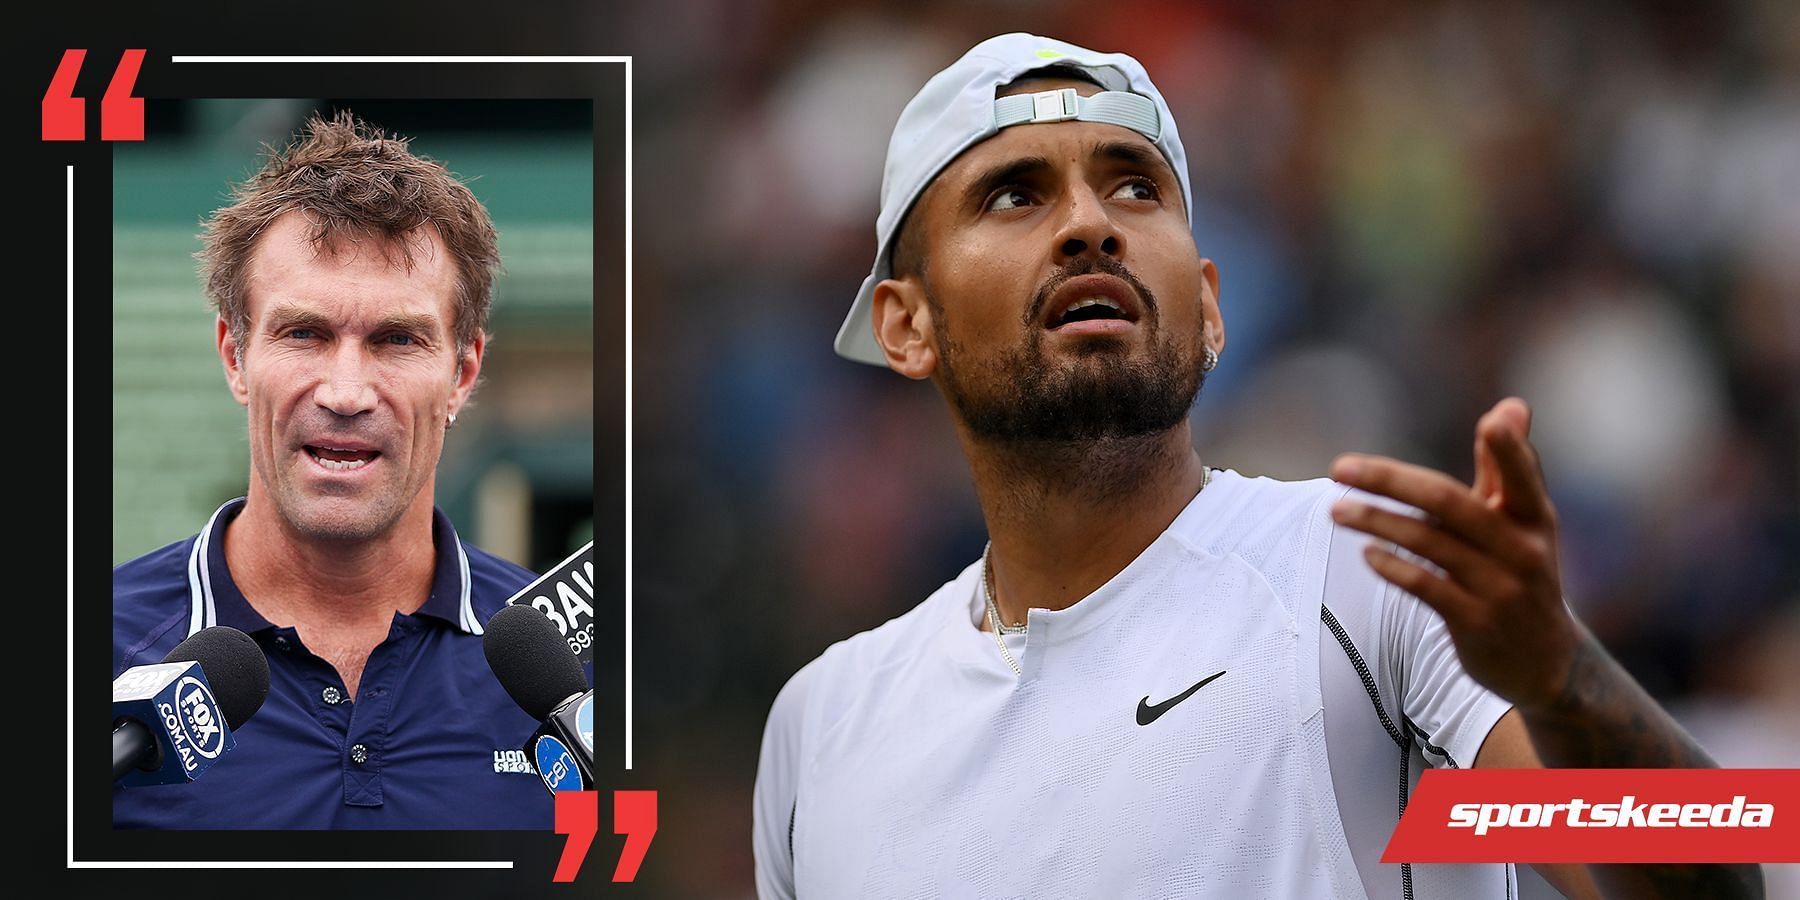 Pat Cash launched a blistering attack on Nick Kyrgios